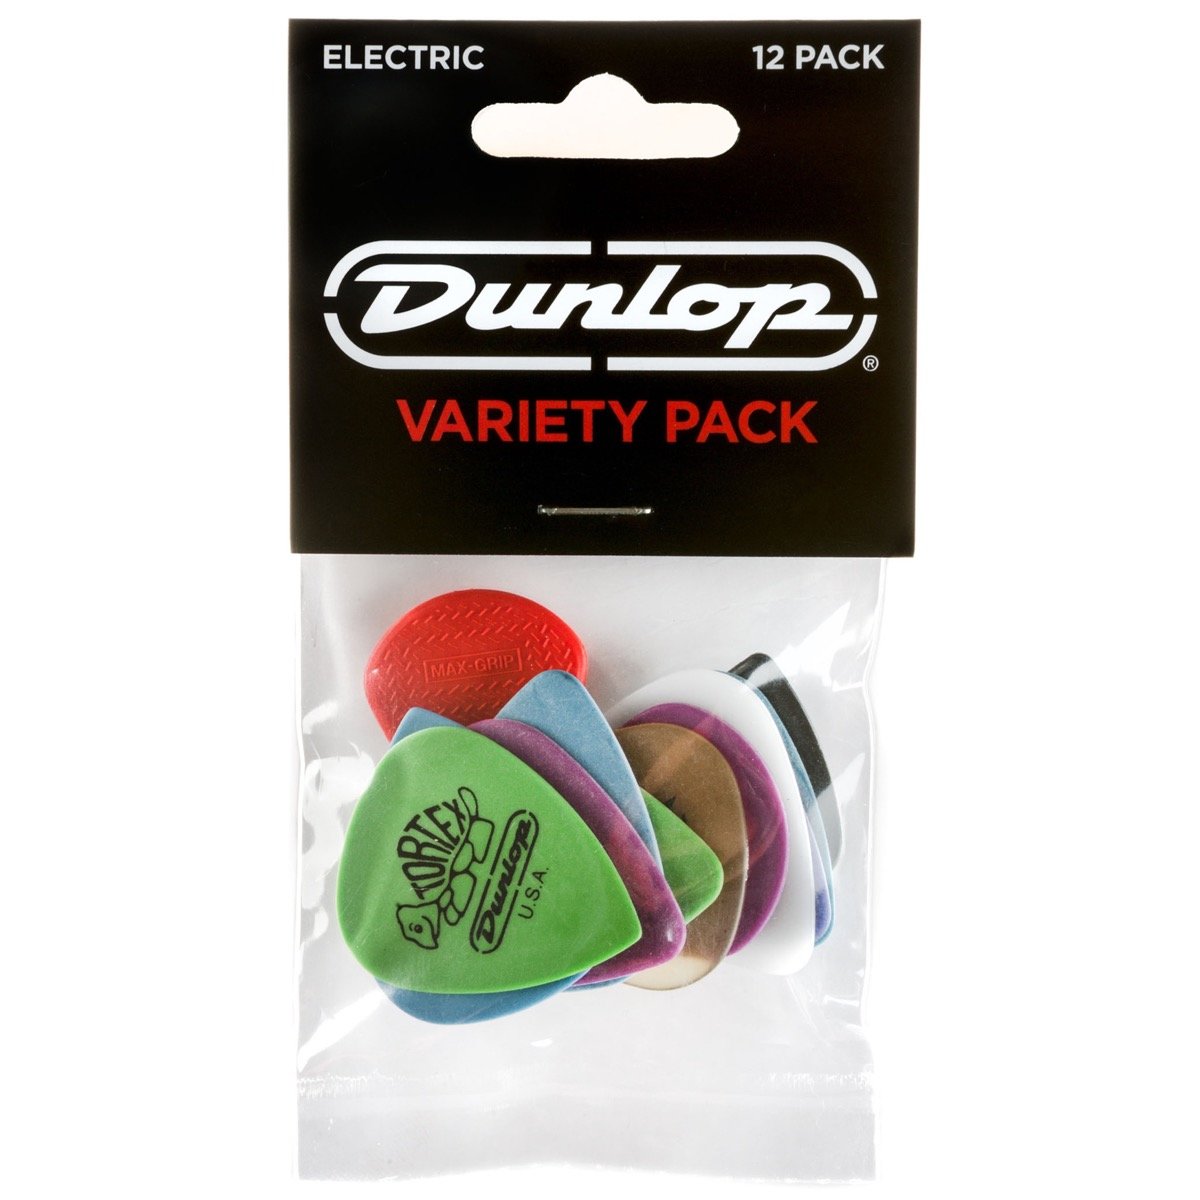 Electric Players Variety Pick Pack - Dunlop PVP113